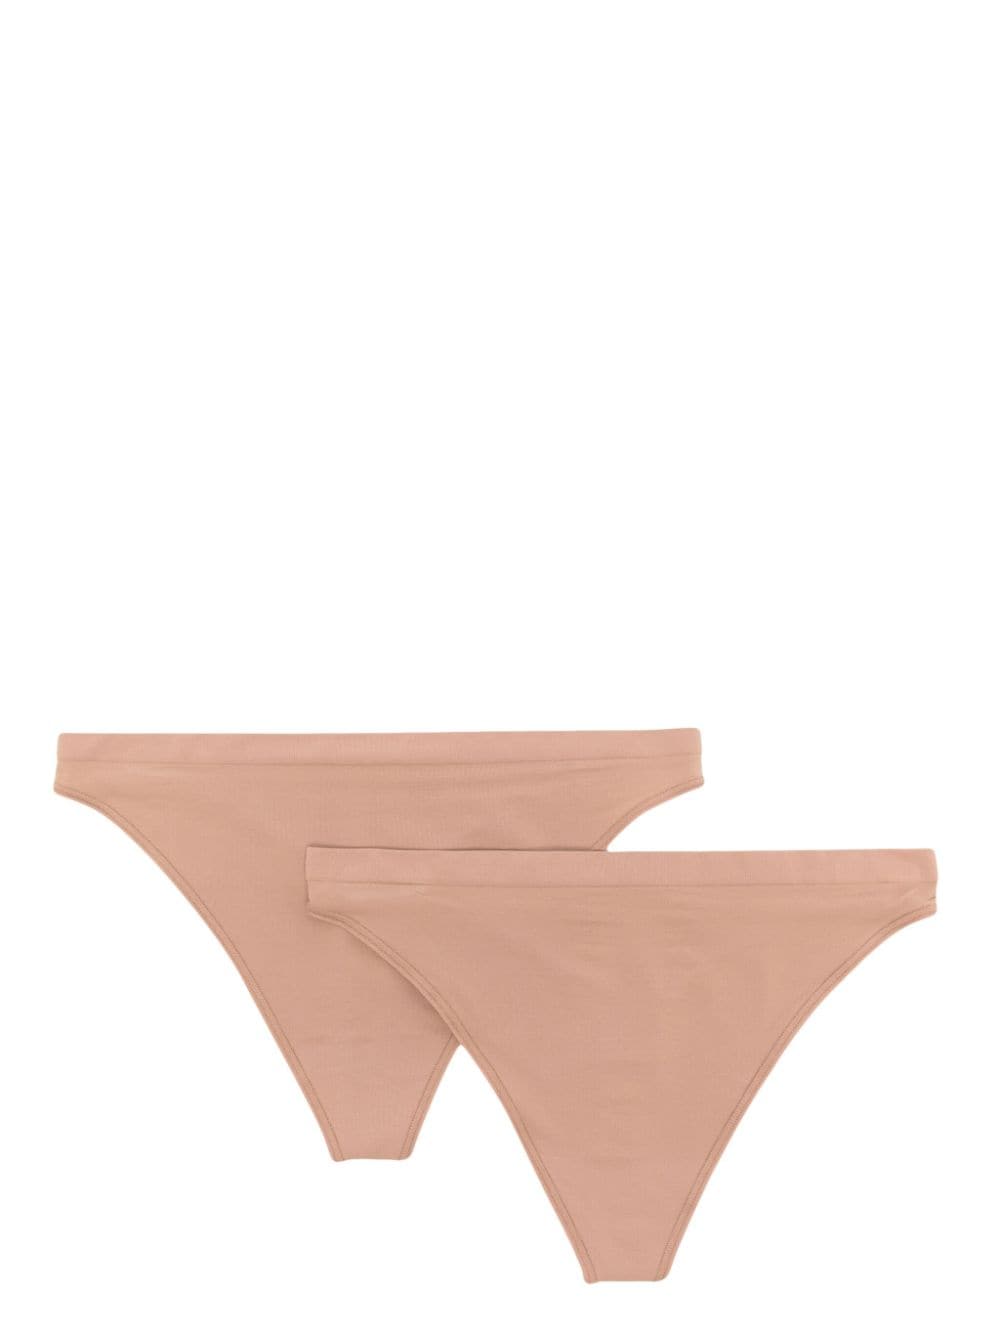 Wolford seamless high-cut thongs (pack of two) - Neutrals von Wolford